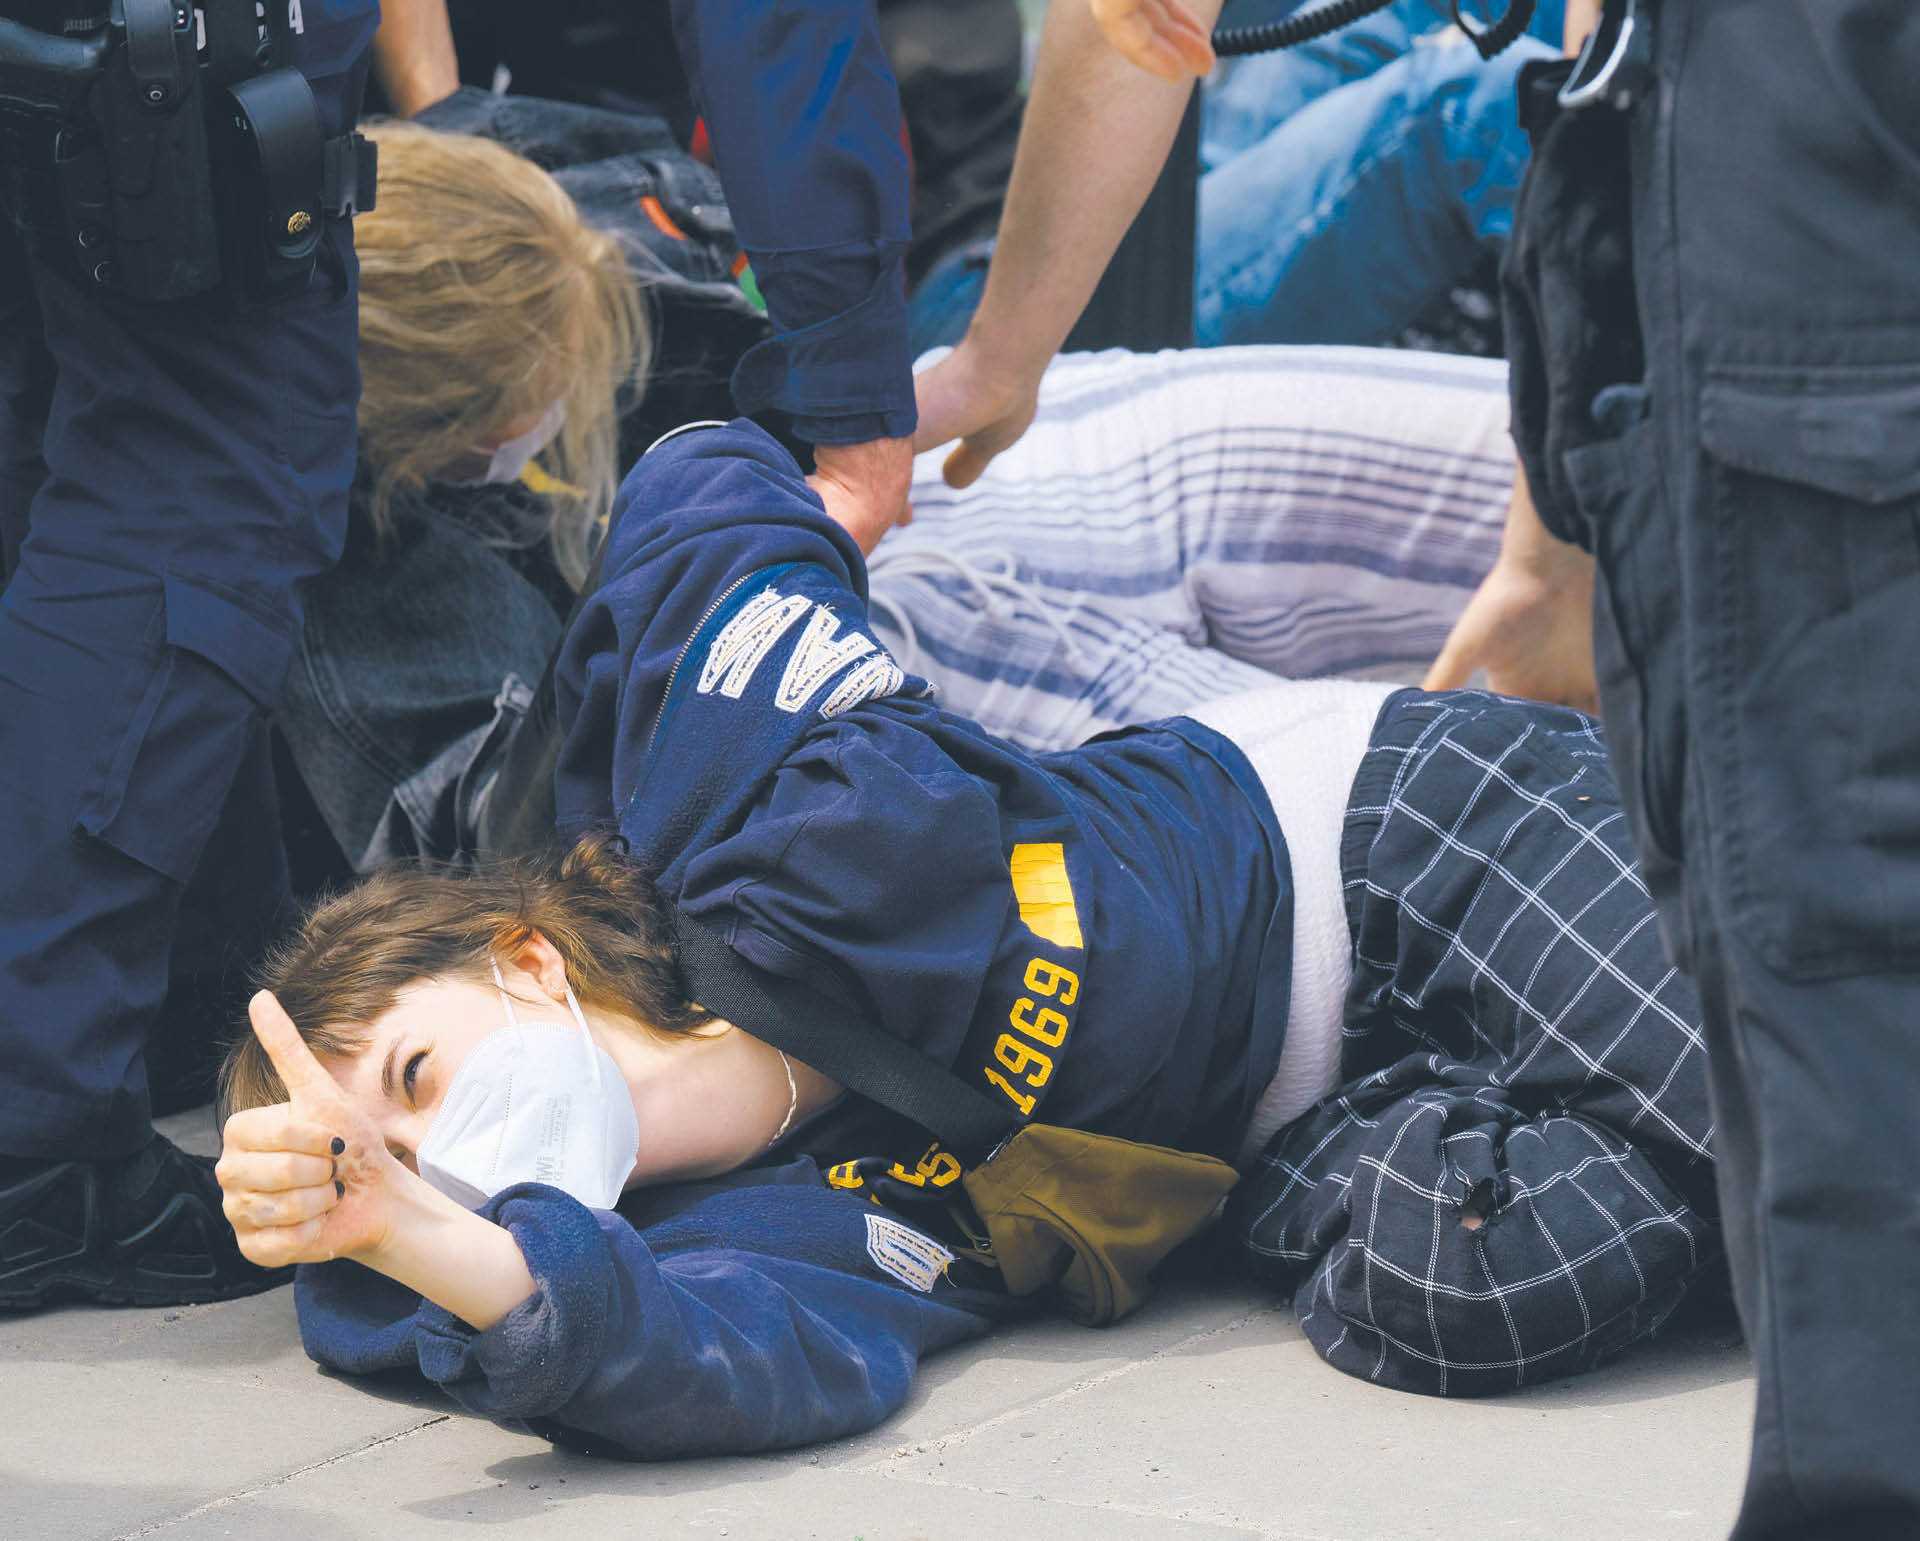 Police remove Extinction Rebellion Poland activists who blocked one of the major streets in Warsaw, the Wisłostrada. Warsaw, 24 May 2021